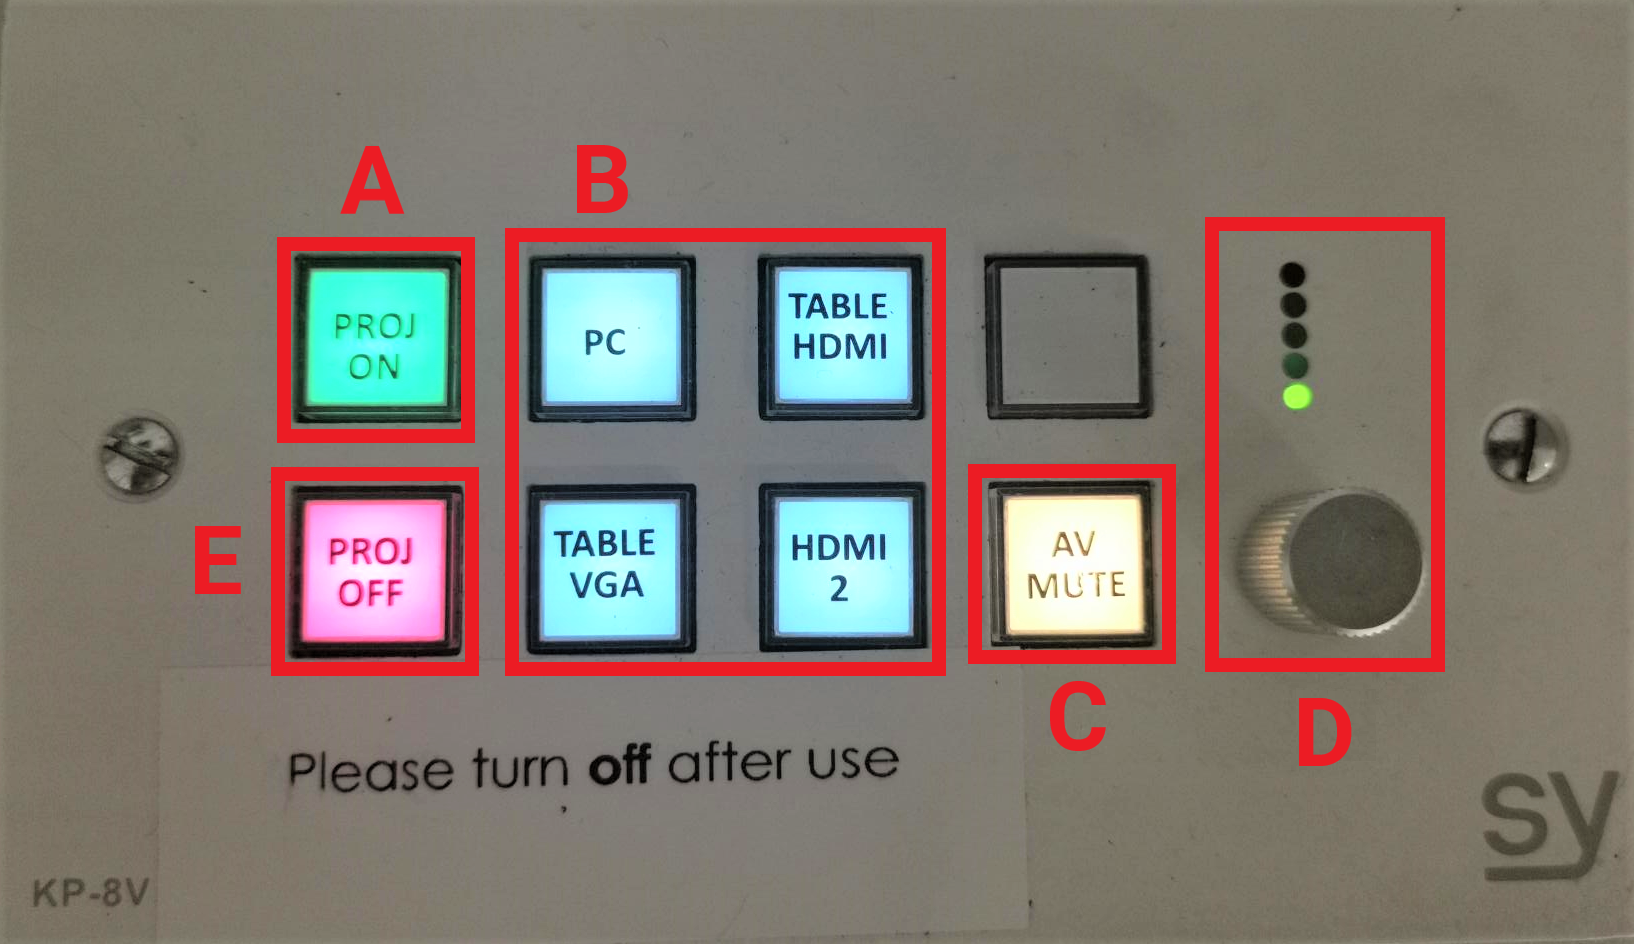 A lectern push button controller. Buttons from left to right top: On. PC. HDMI. Button from left to right bottom: Off. VGA. HDMI 2. AV Mute. There is a volume control nob to the far rights.